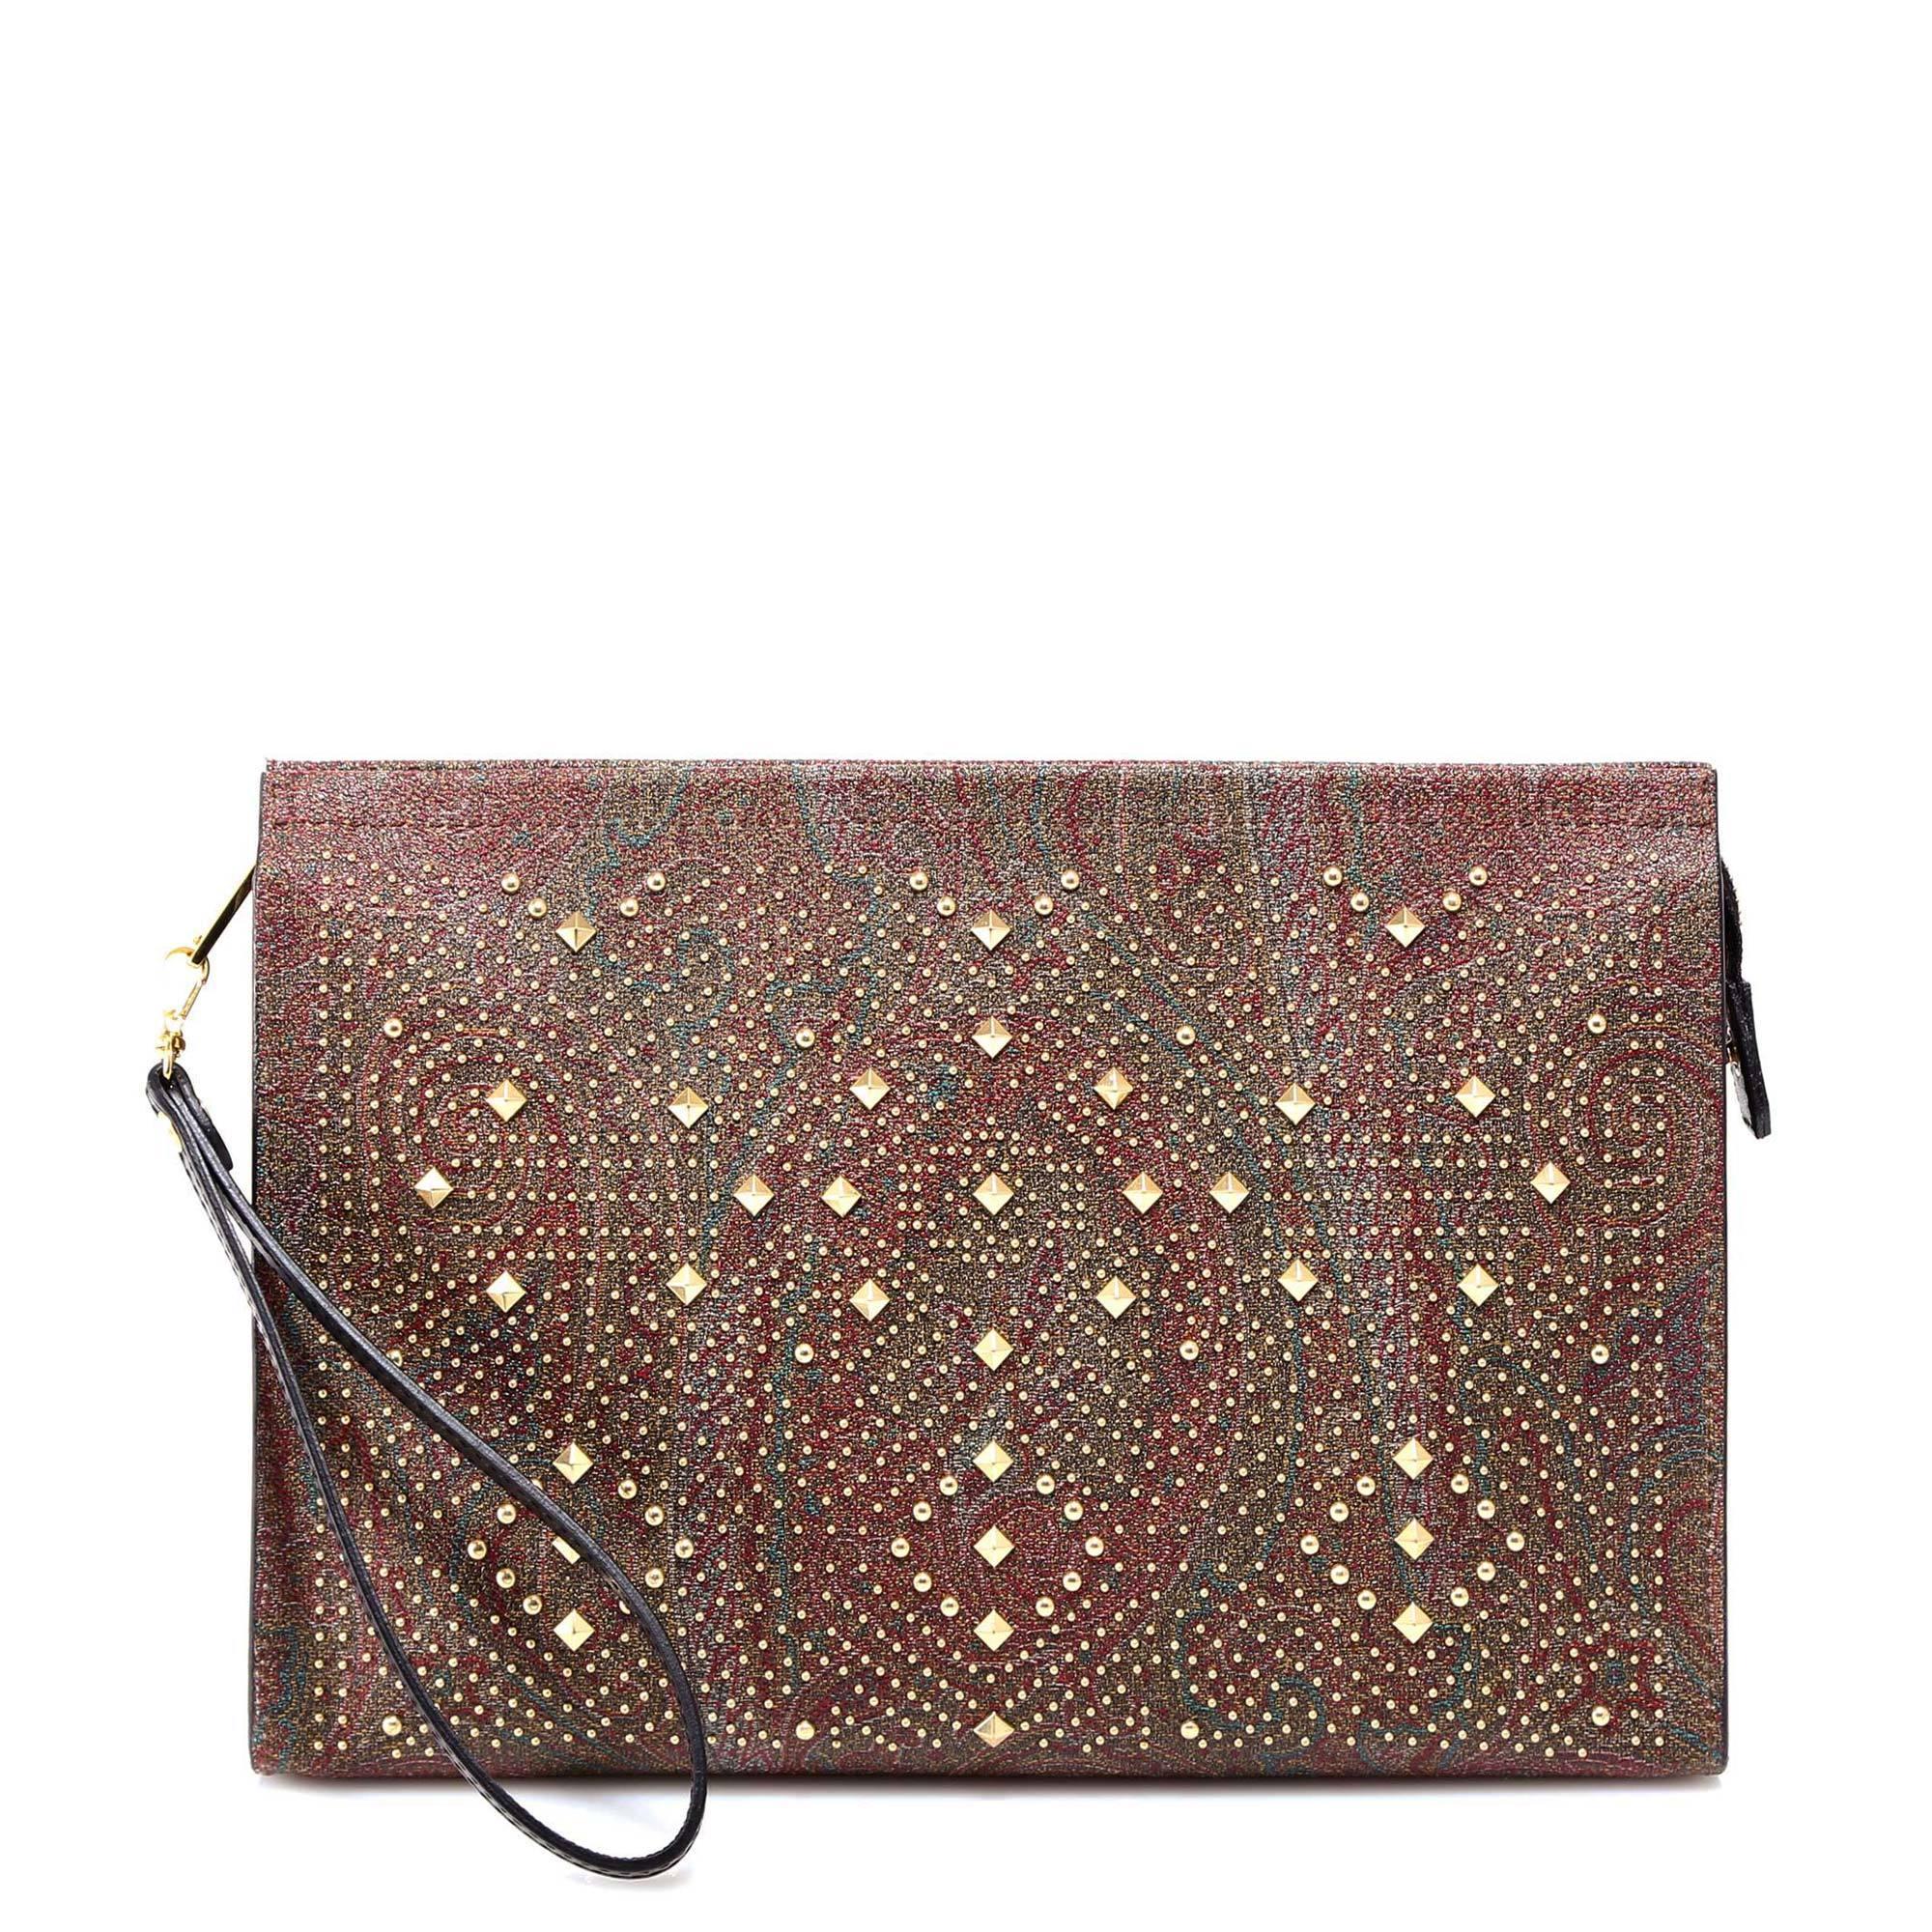 Etro Cotton Studded Paisley Print Clutch Bag in Brown - Lyst